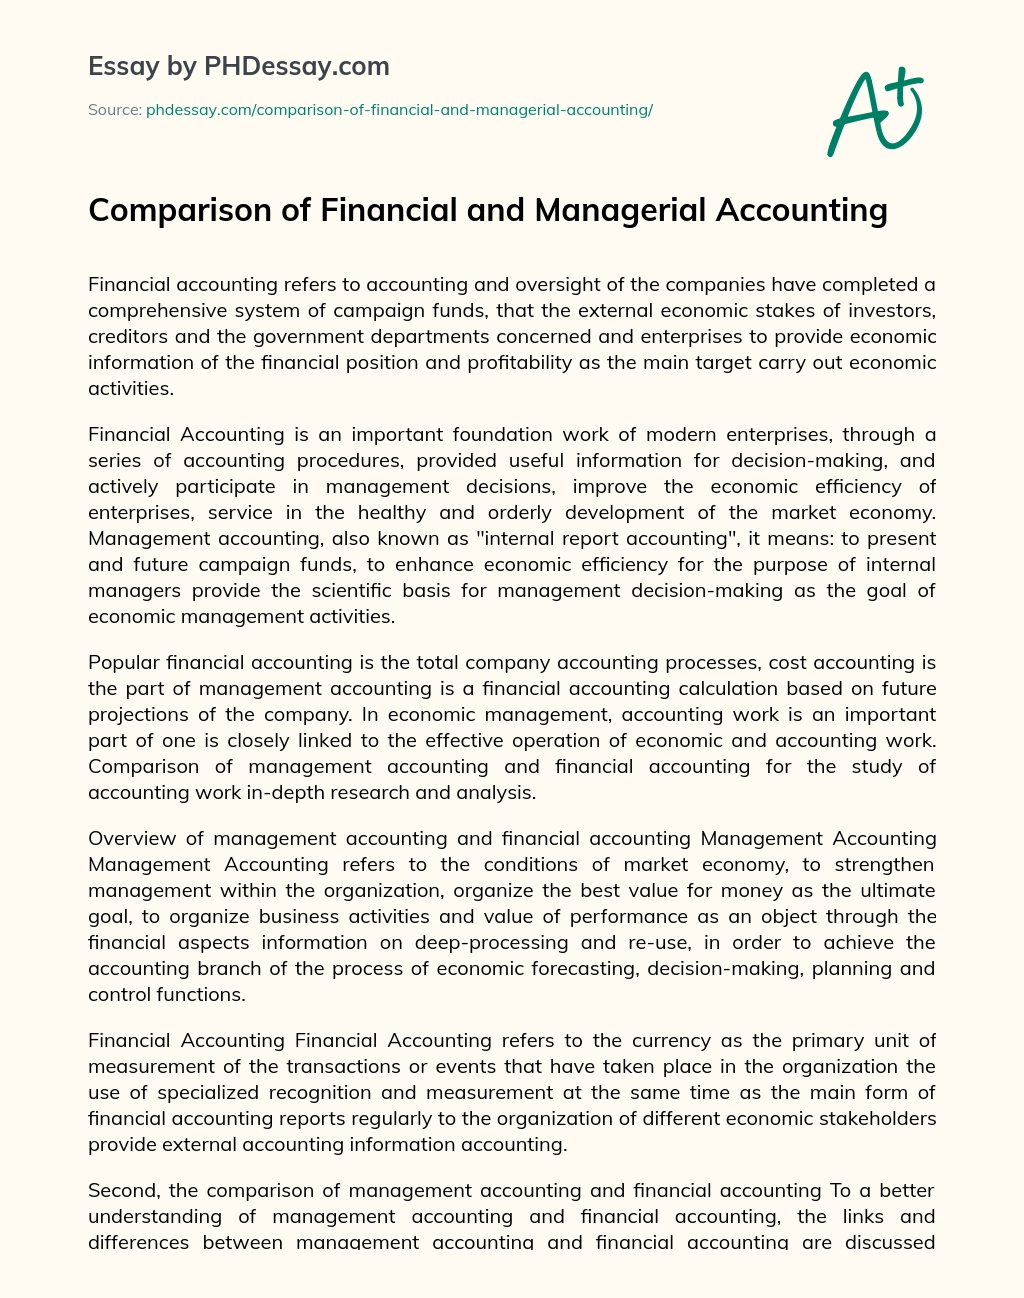 Comparison of Financial and Managerial Accounting essay